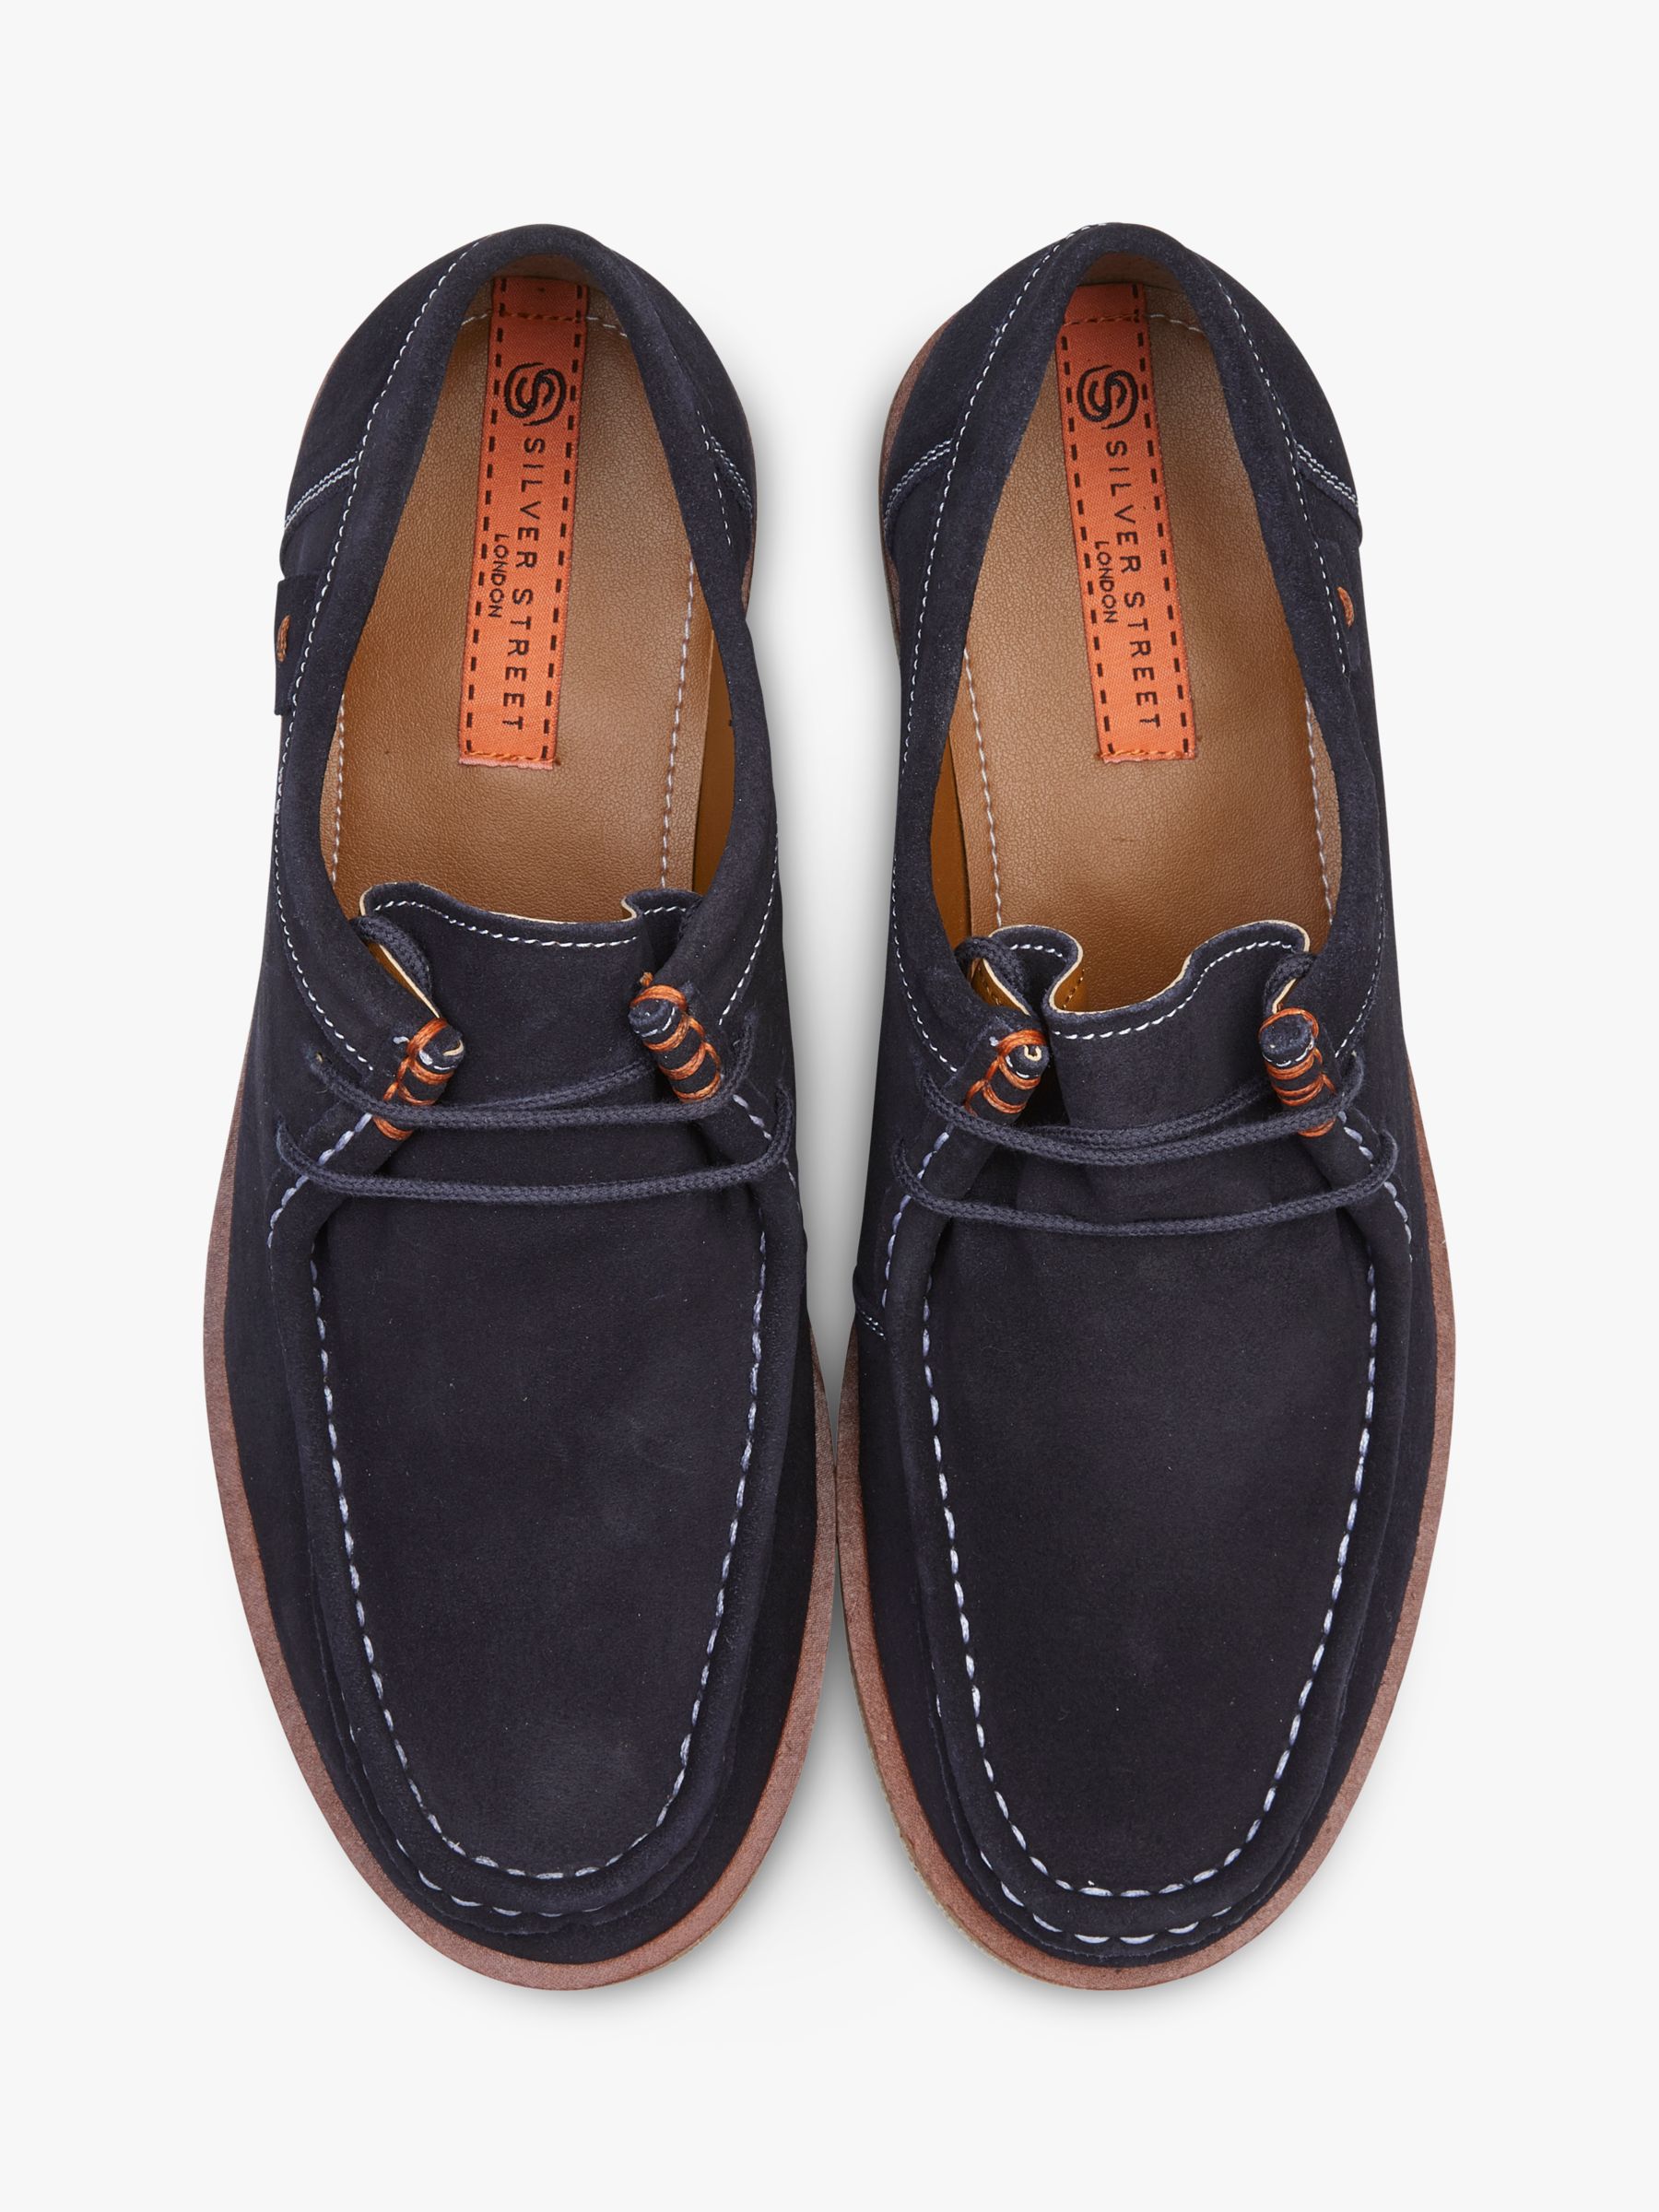 Silver Street London Sydney Suede Moccasin Boots, Navy at John Lewis ...